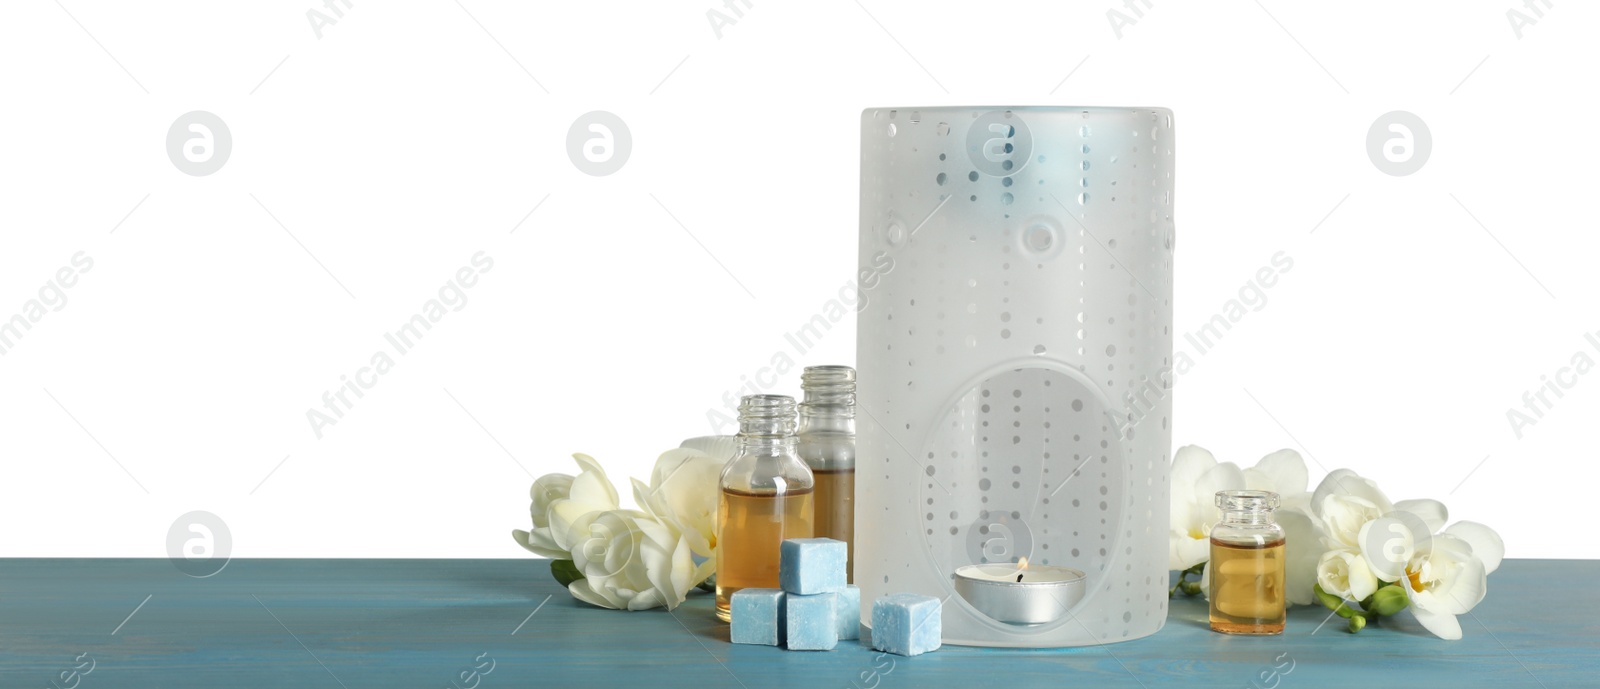 Photo of Composition with aroma lamp on blue wooden table against light grey background, space for text